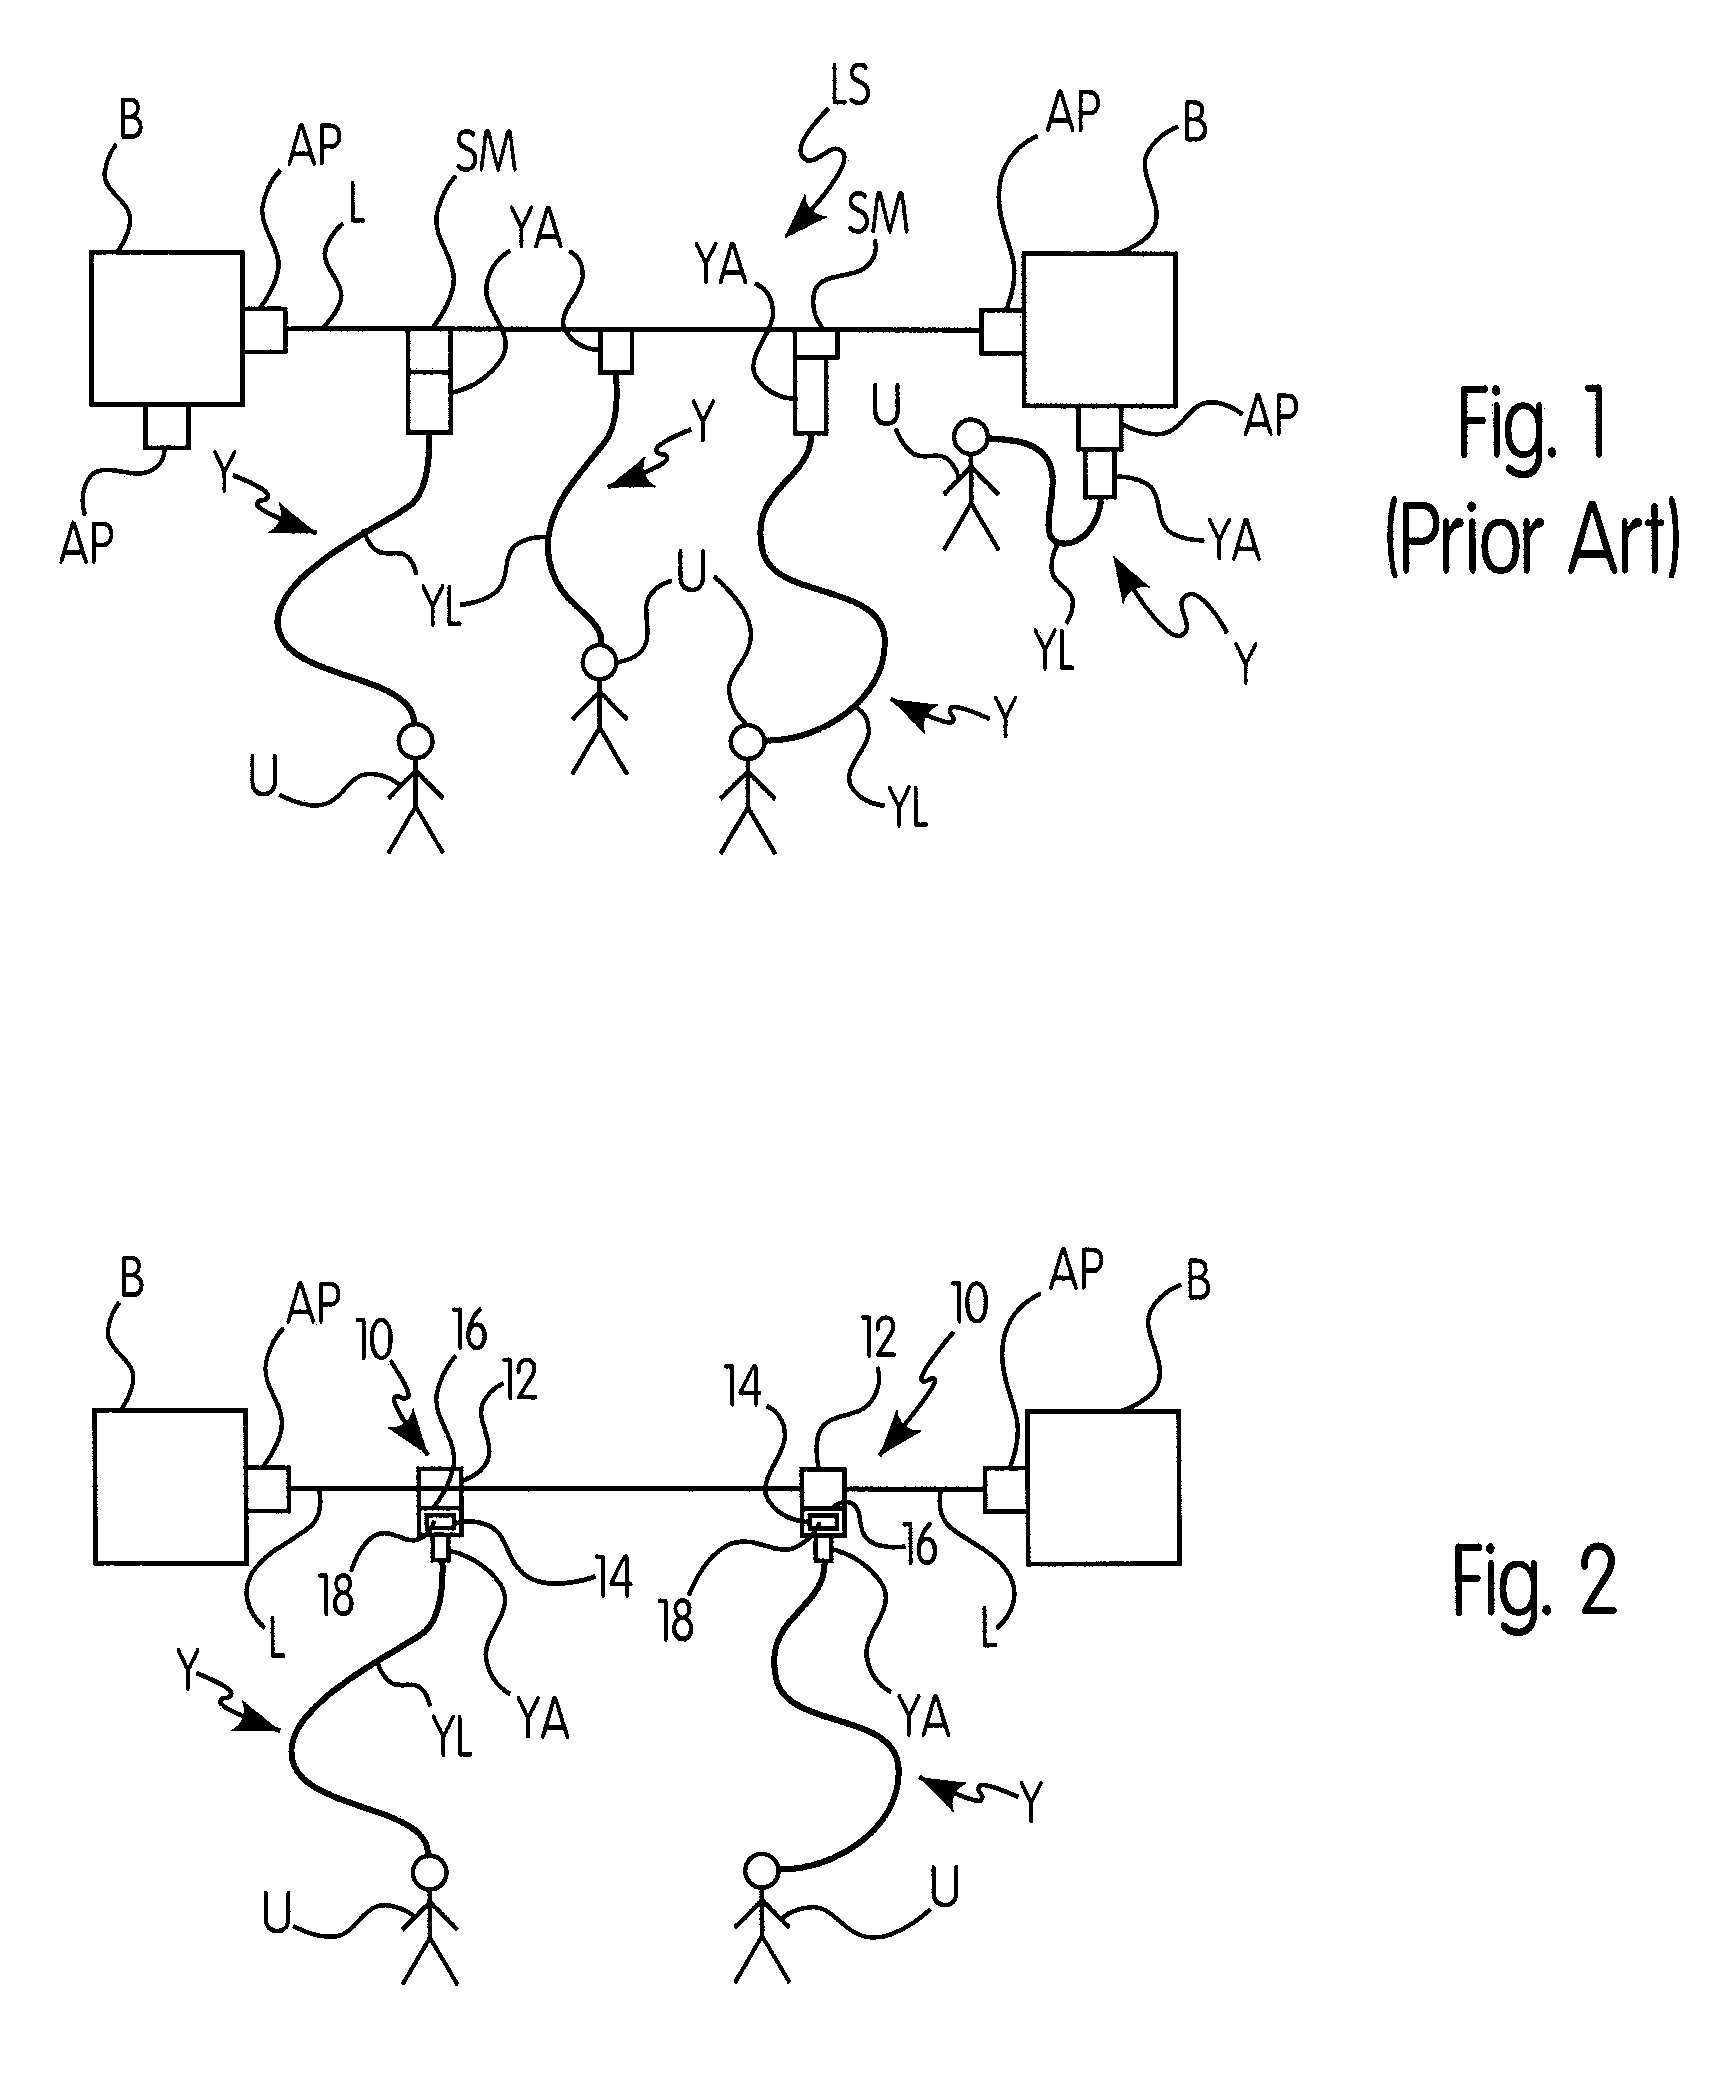 Method, Apparatus, and Arrangement for a Lifeline System